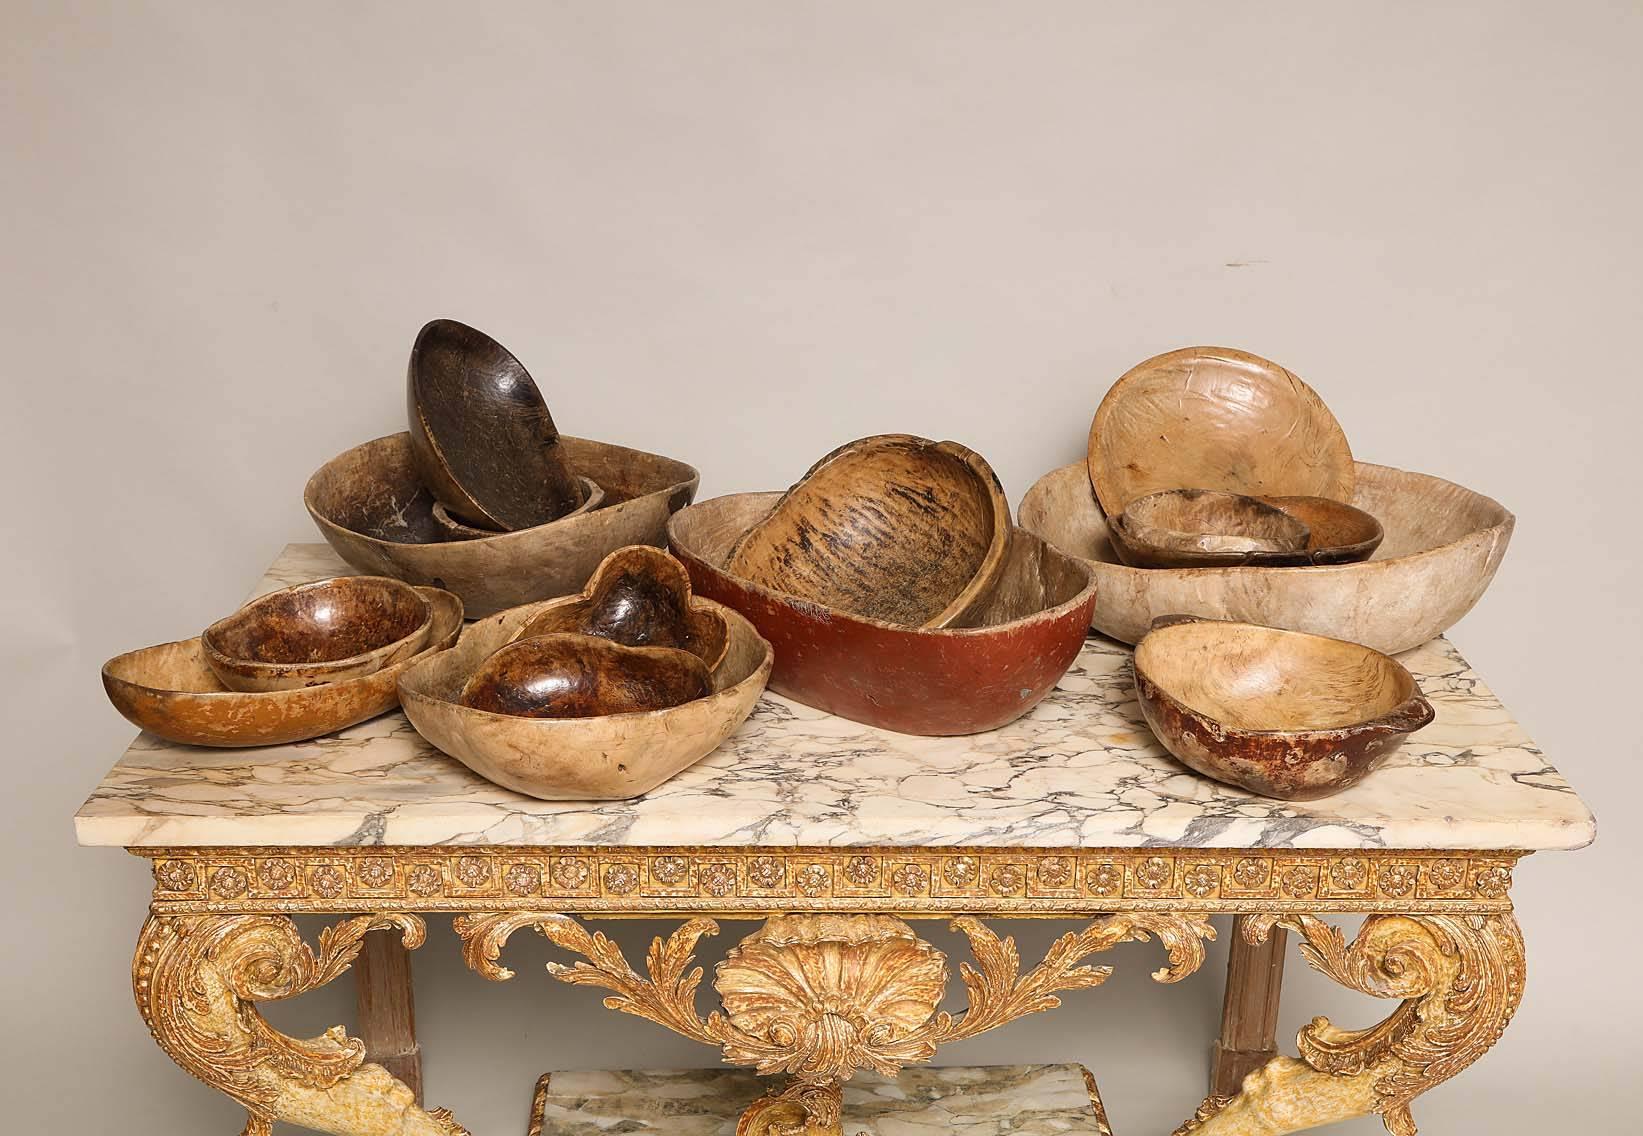 A stunning collection of 18th and early 19th century Swedish burl bowls in various shapes and sizes and with a variety of surfaces, some retaining original paint decoration, some with rich and lustrous waxed finishes, other dry and untouched, all of